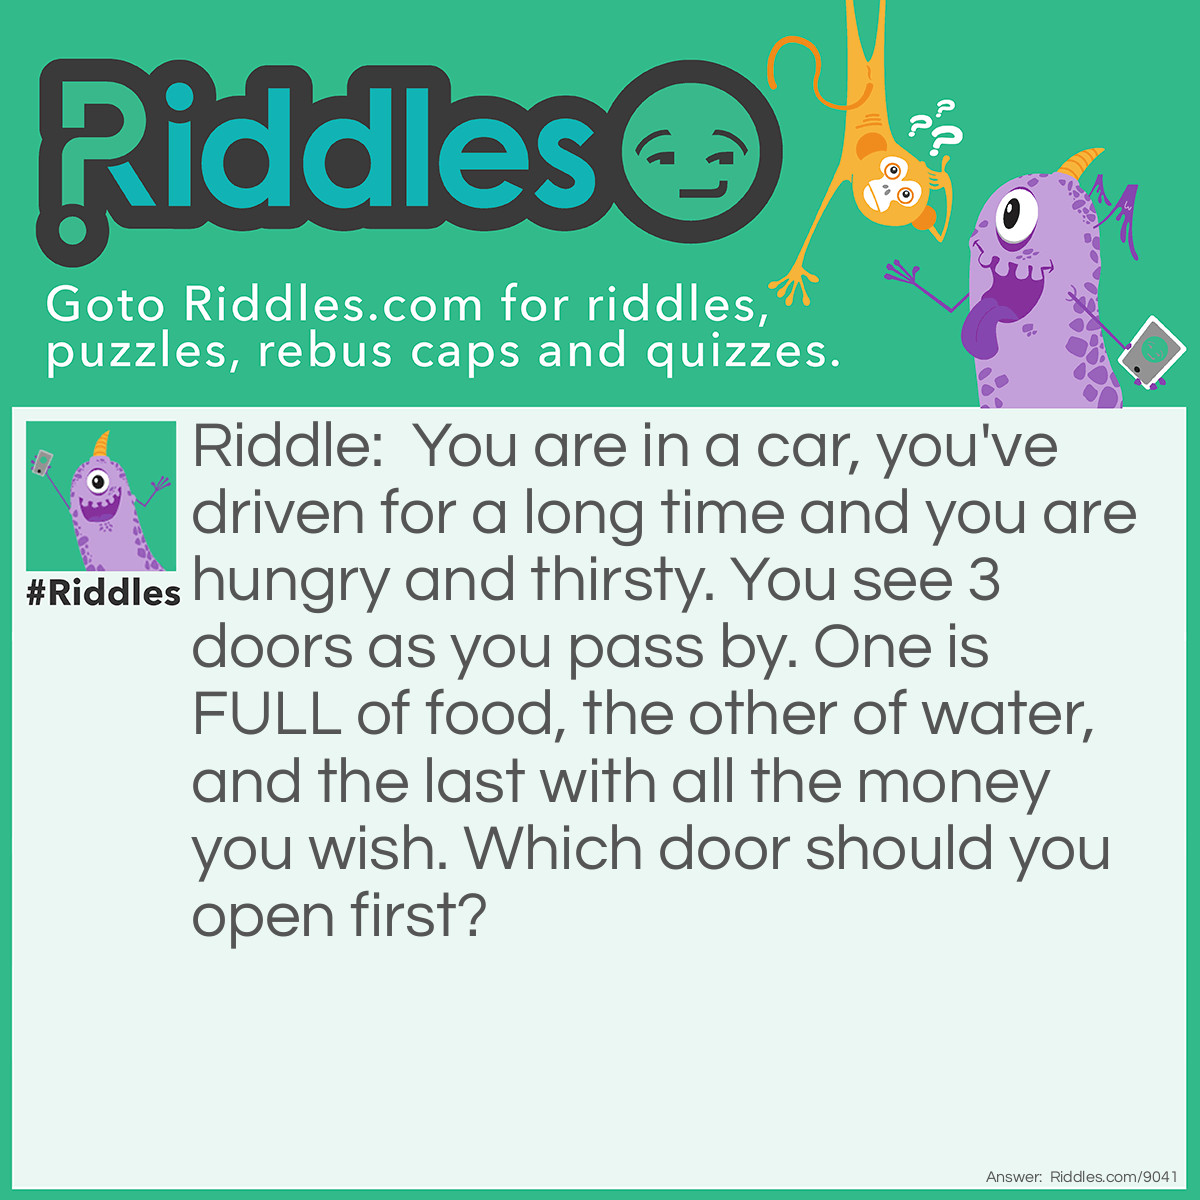 Riddle: You are in a car, you've driven for a long time and you are hungry and thirsty. You see 3 doors as you pass by. One is FULL of food, the other of water, and the last with all the money you wish. Which door should you open first? Answer: Your CAR door of course! How do you open the other ones if you are still in your car???